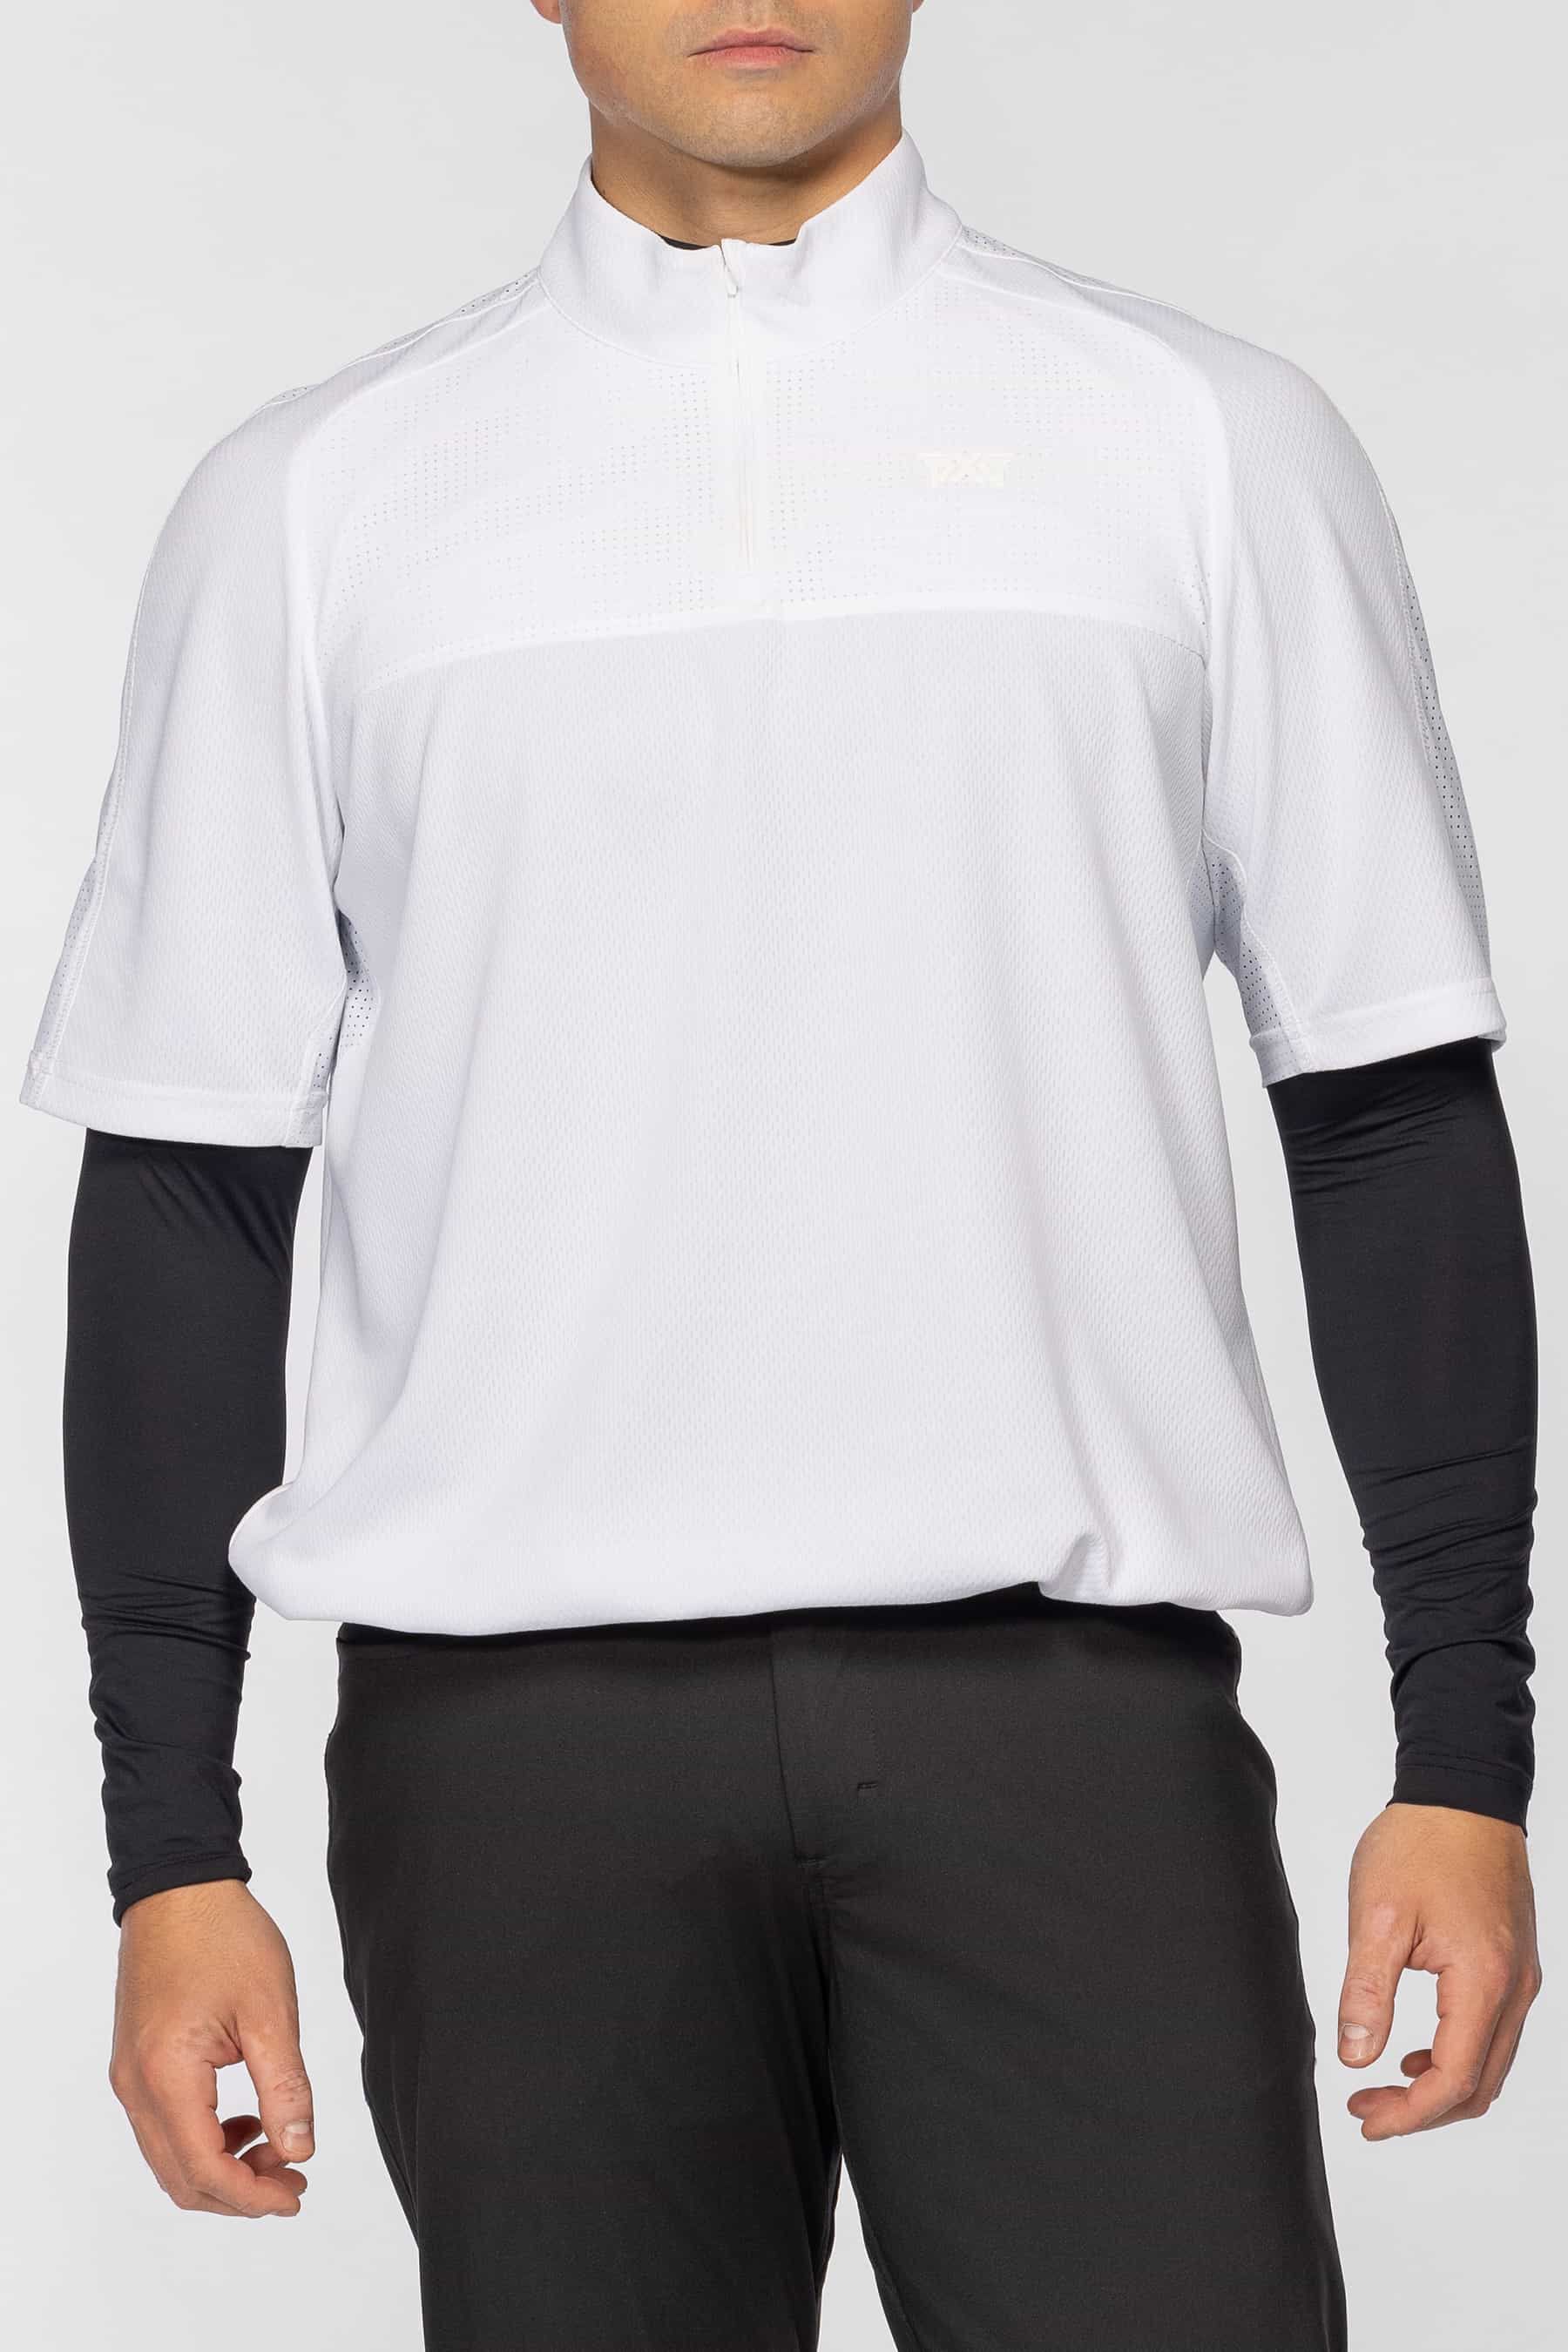 Shop Men's Golf Tops - Shirts, Pullovers and More | PXG